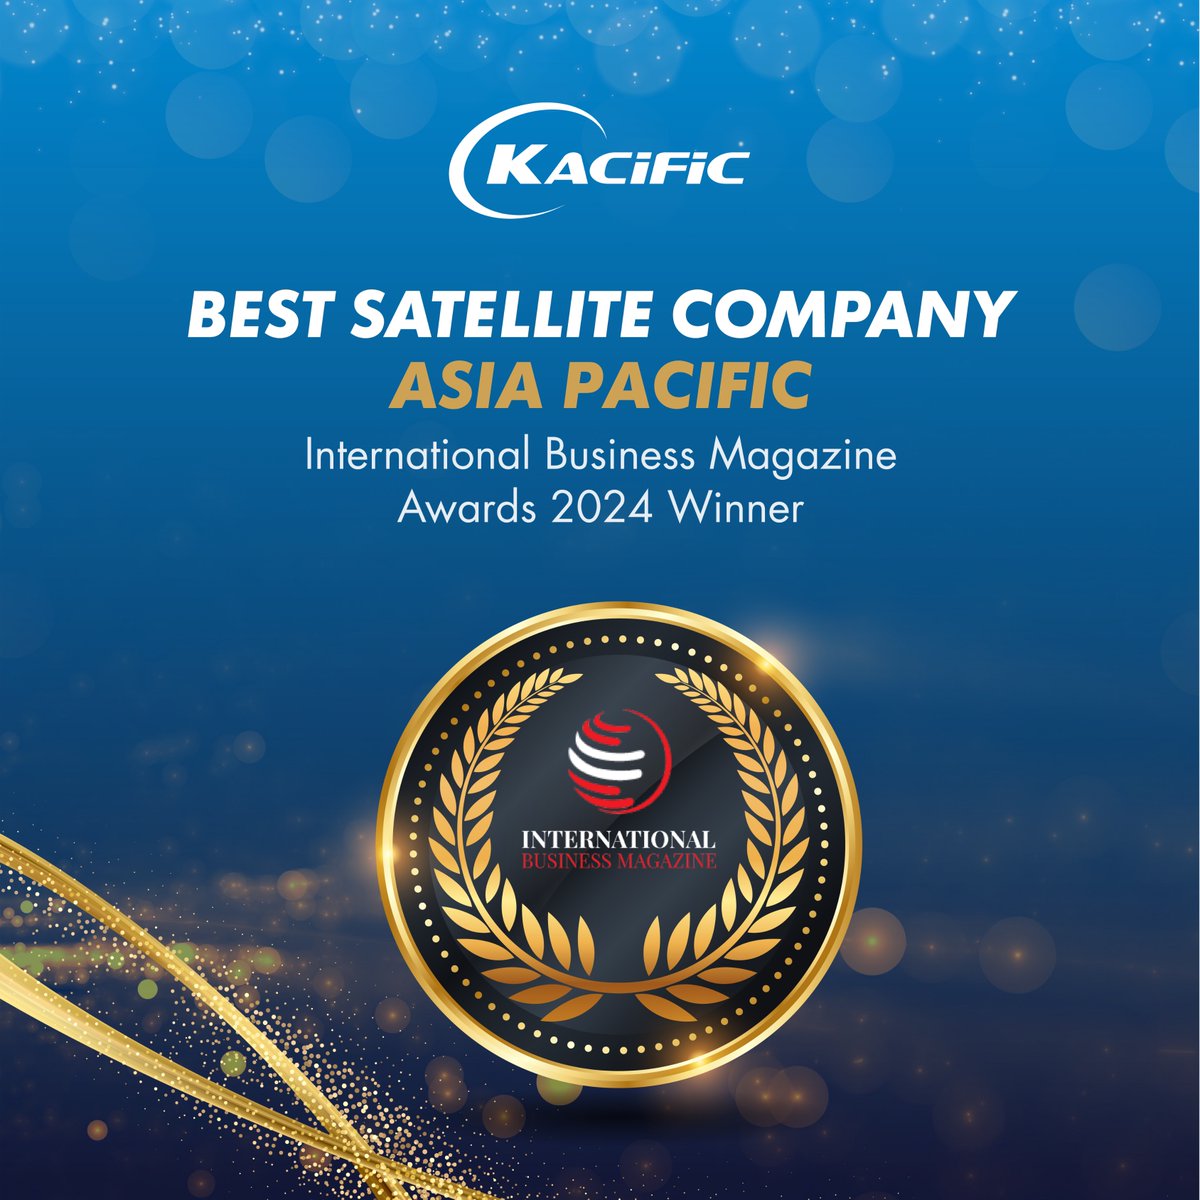 Huge milestones for Kacific!

Best Satellite Company - Asia Pacific
Christian Patouraux - Satellite CEO of the Year (APAC)
Kacific CommsBox - Most Innovative Disaster Recovery Solution (APAC)

Thanks to the organisers & our amazing community!

#Kacific #SatelliteInternet #Awards